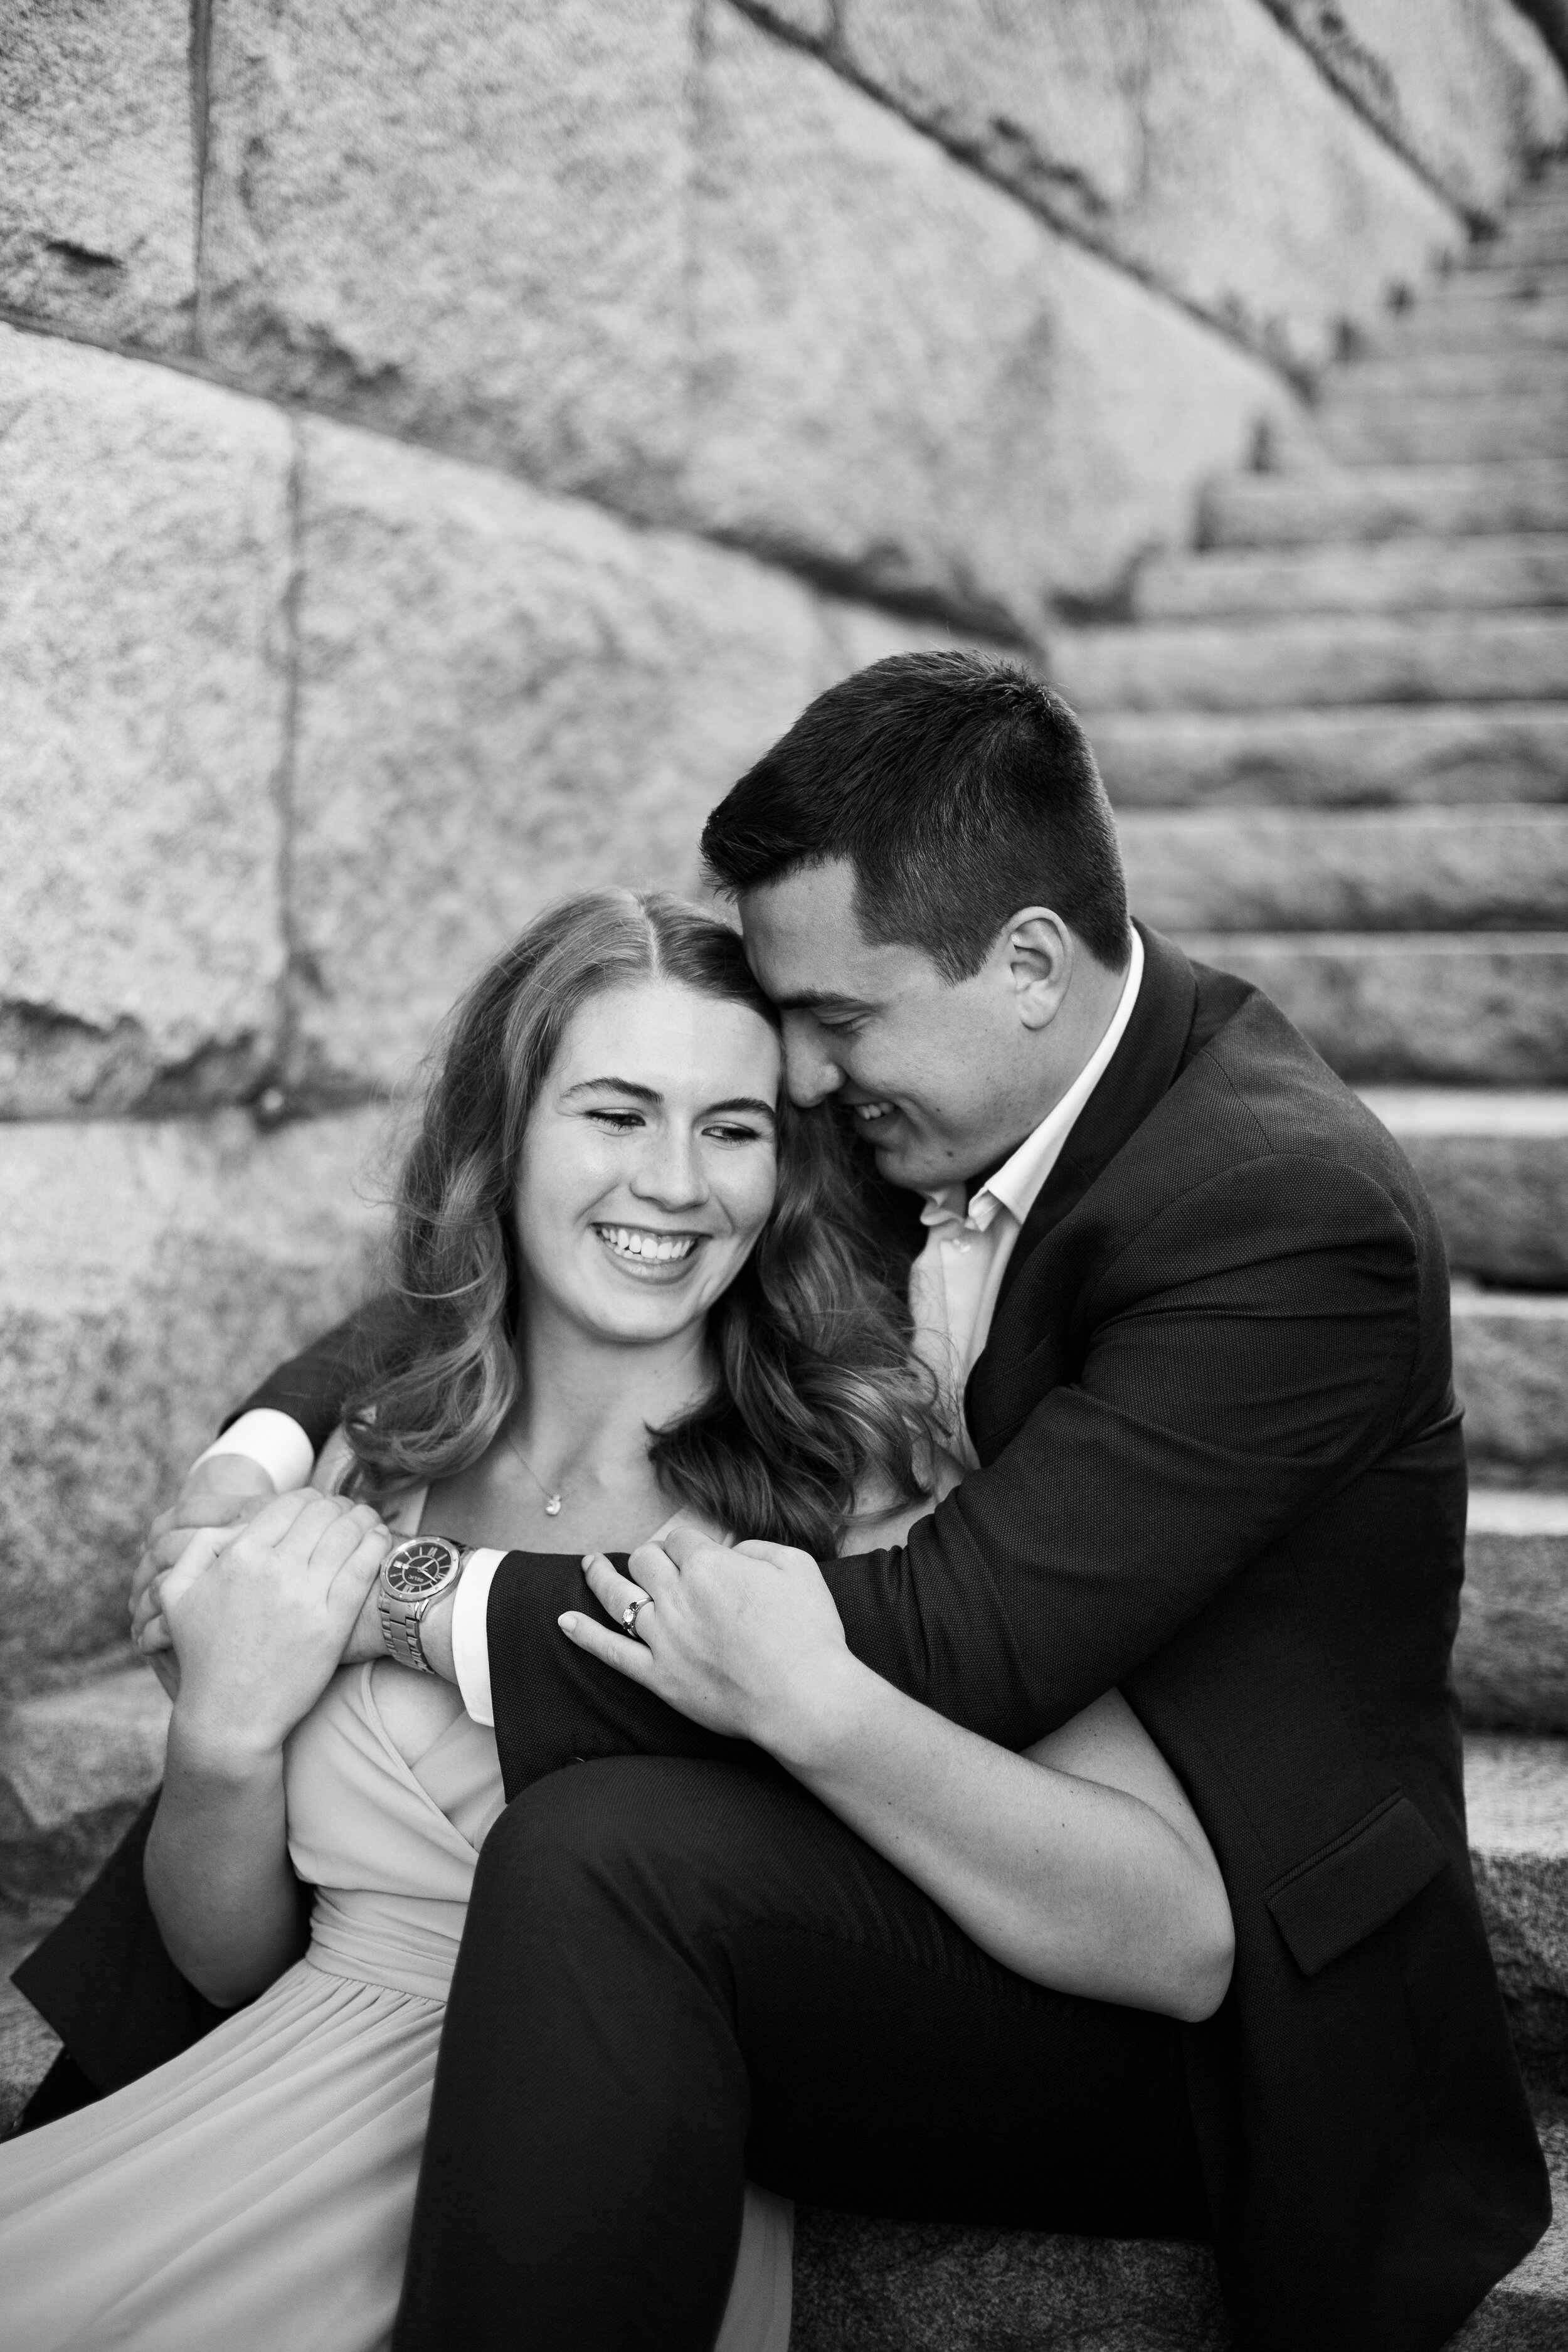 Scenic Chicago Engagement Session captured by Grace Rios Photography featured on CHI thee WED